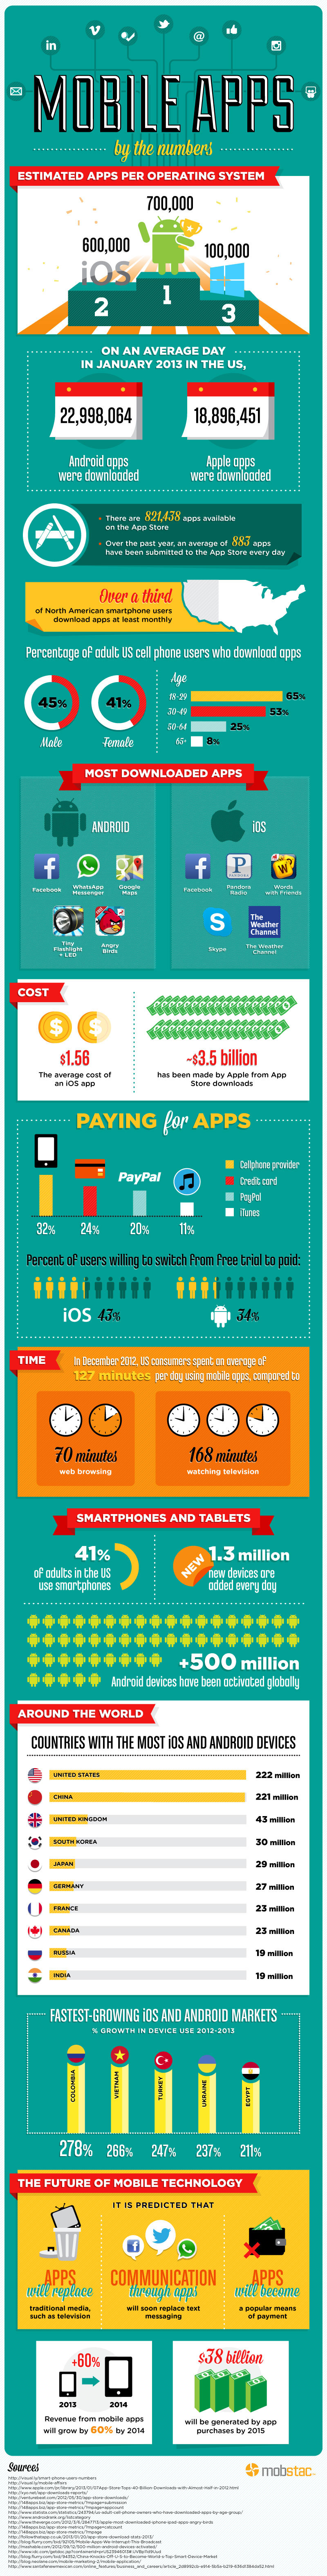 Mobile Apps by the Numbers